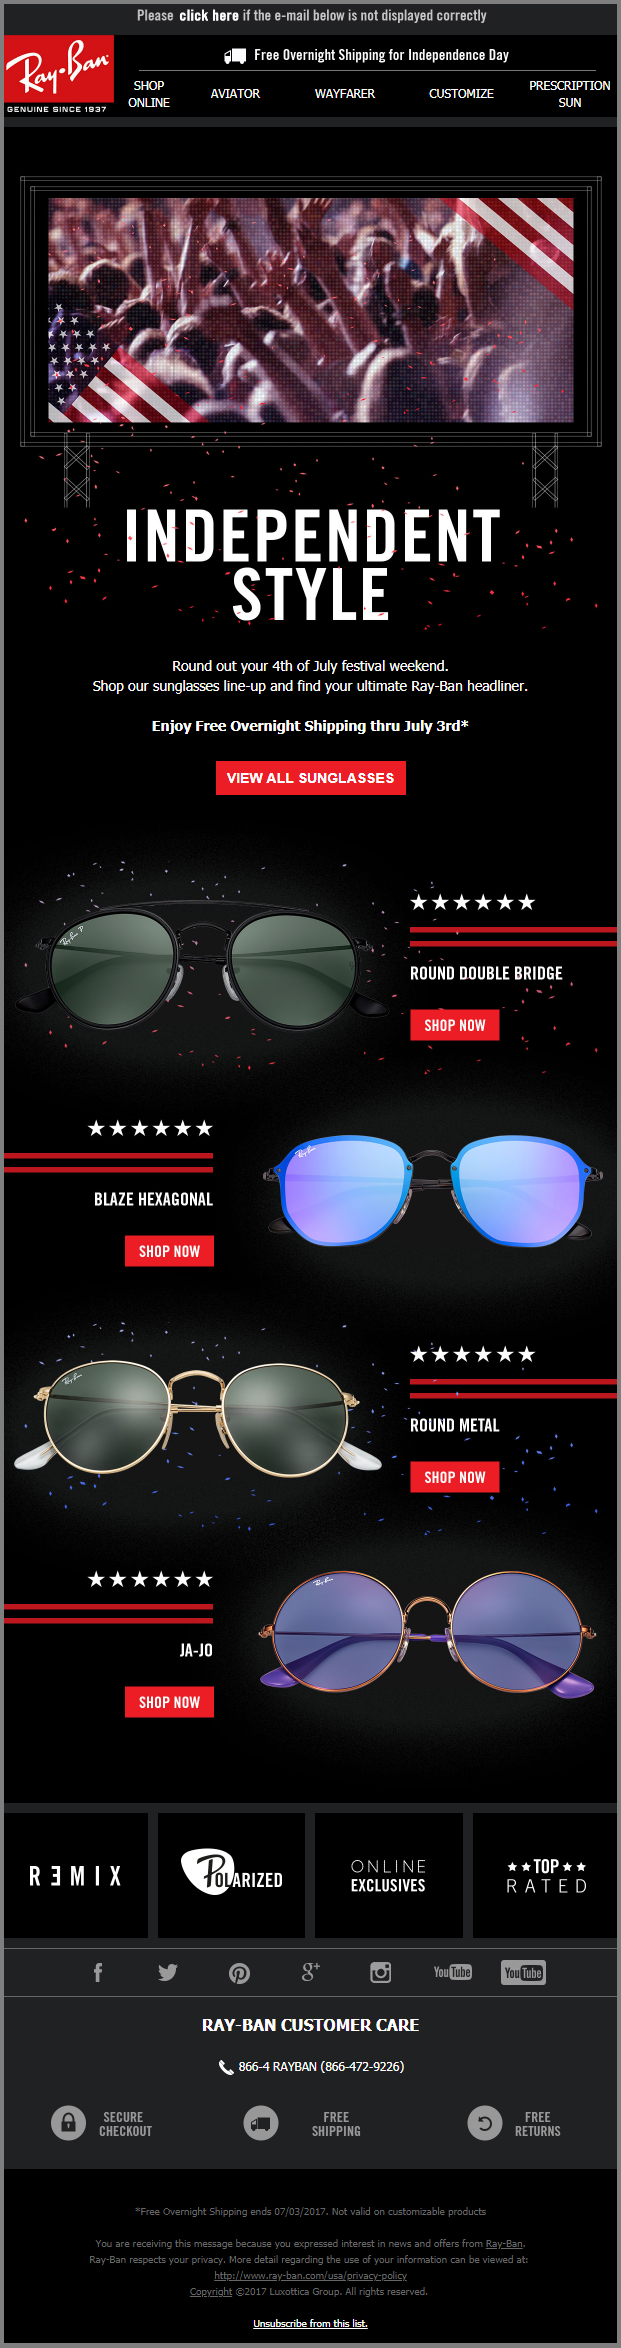 Ray-Ban_Email